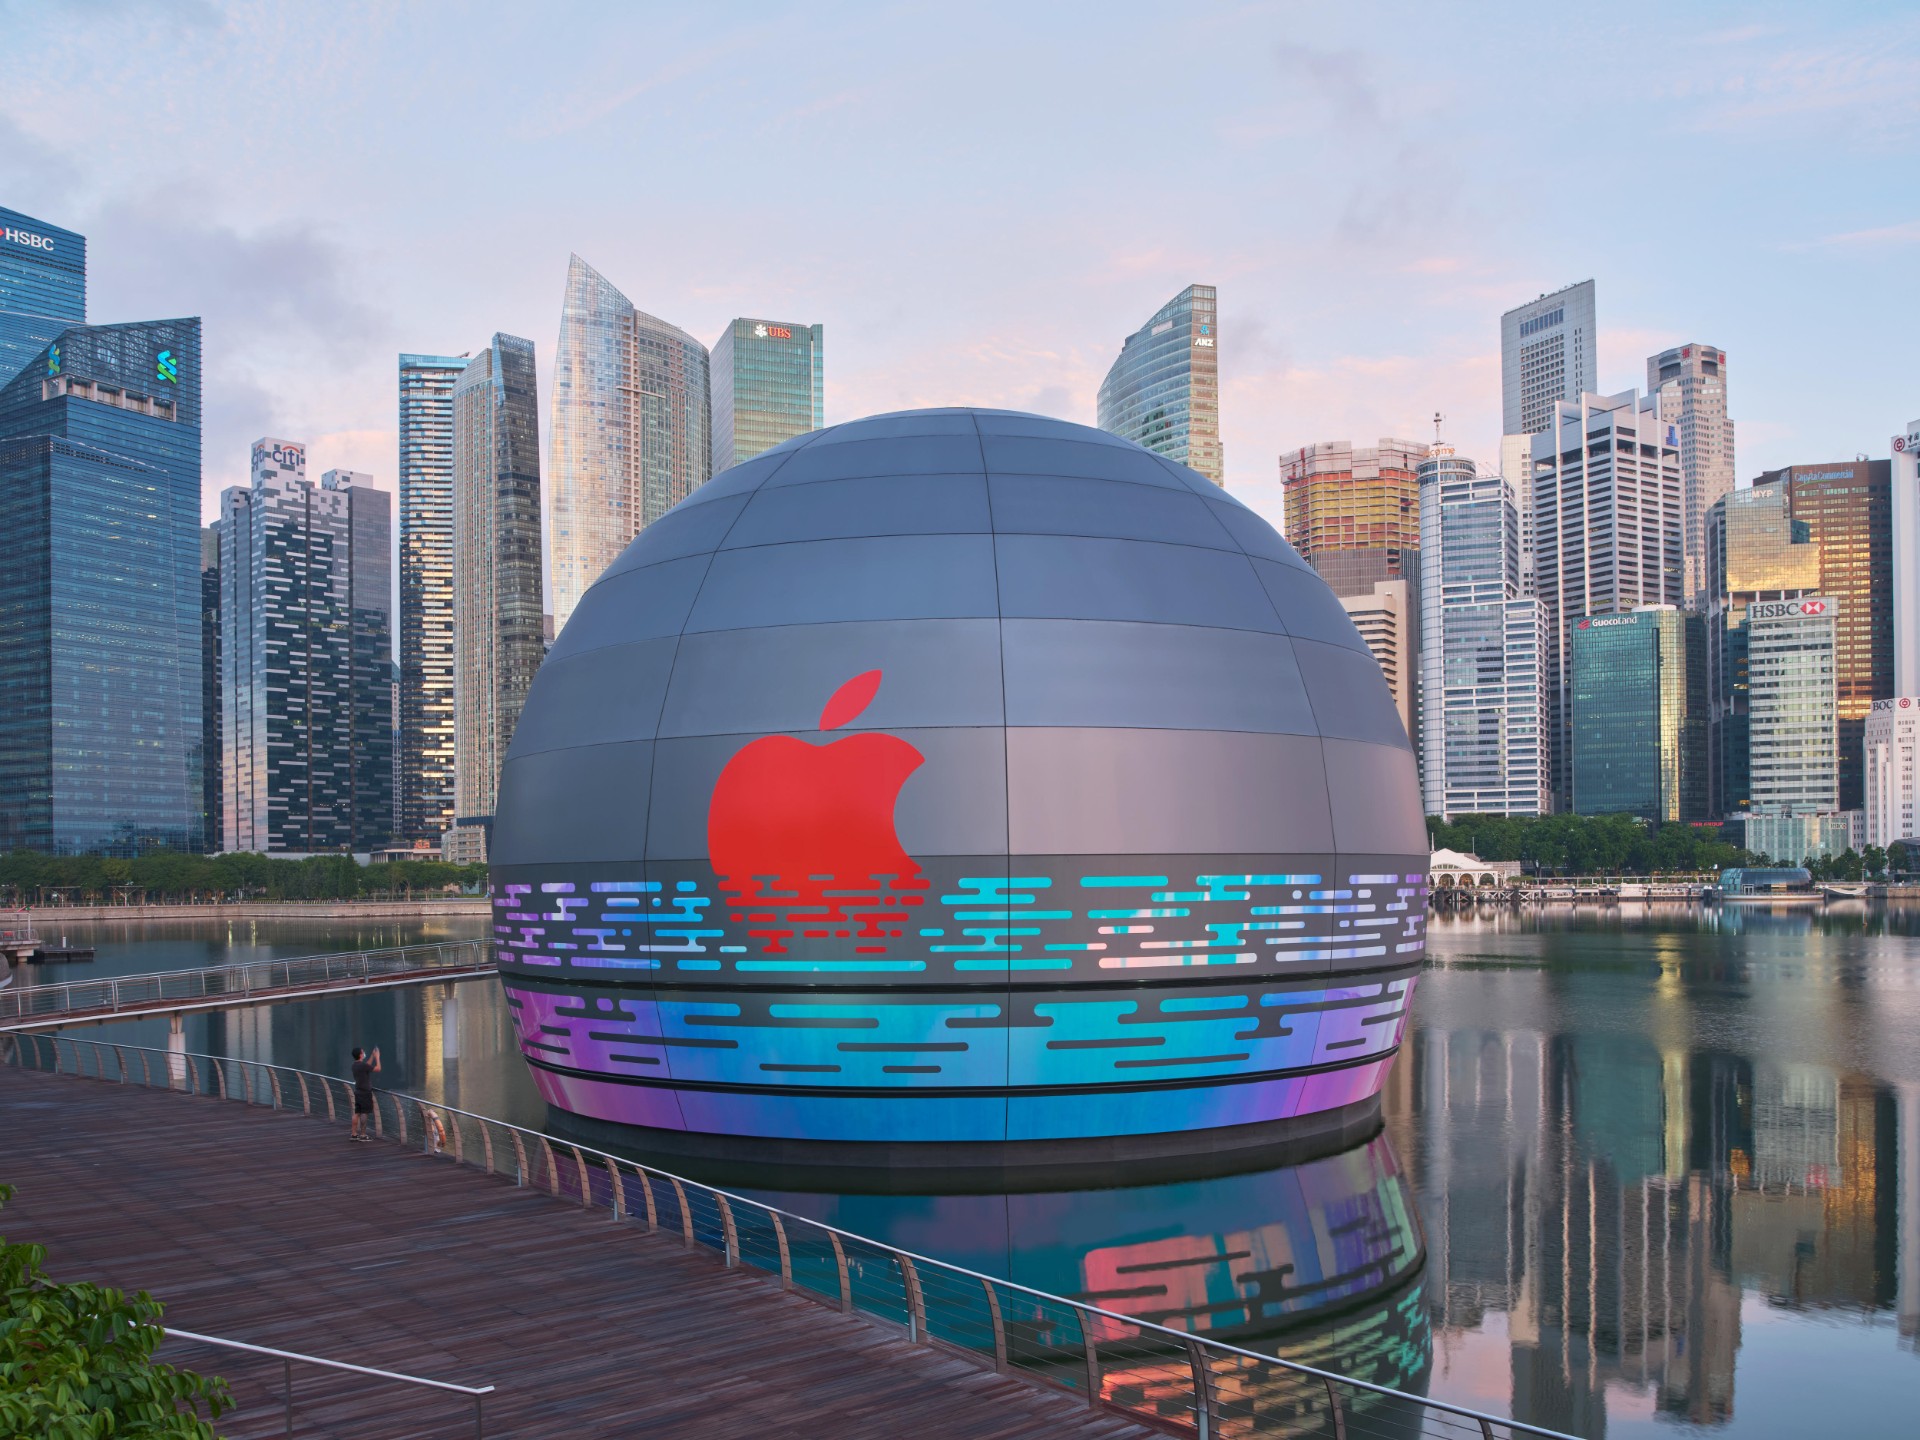 The sphere structure at Marina Bay Sands. Image: Apple
